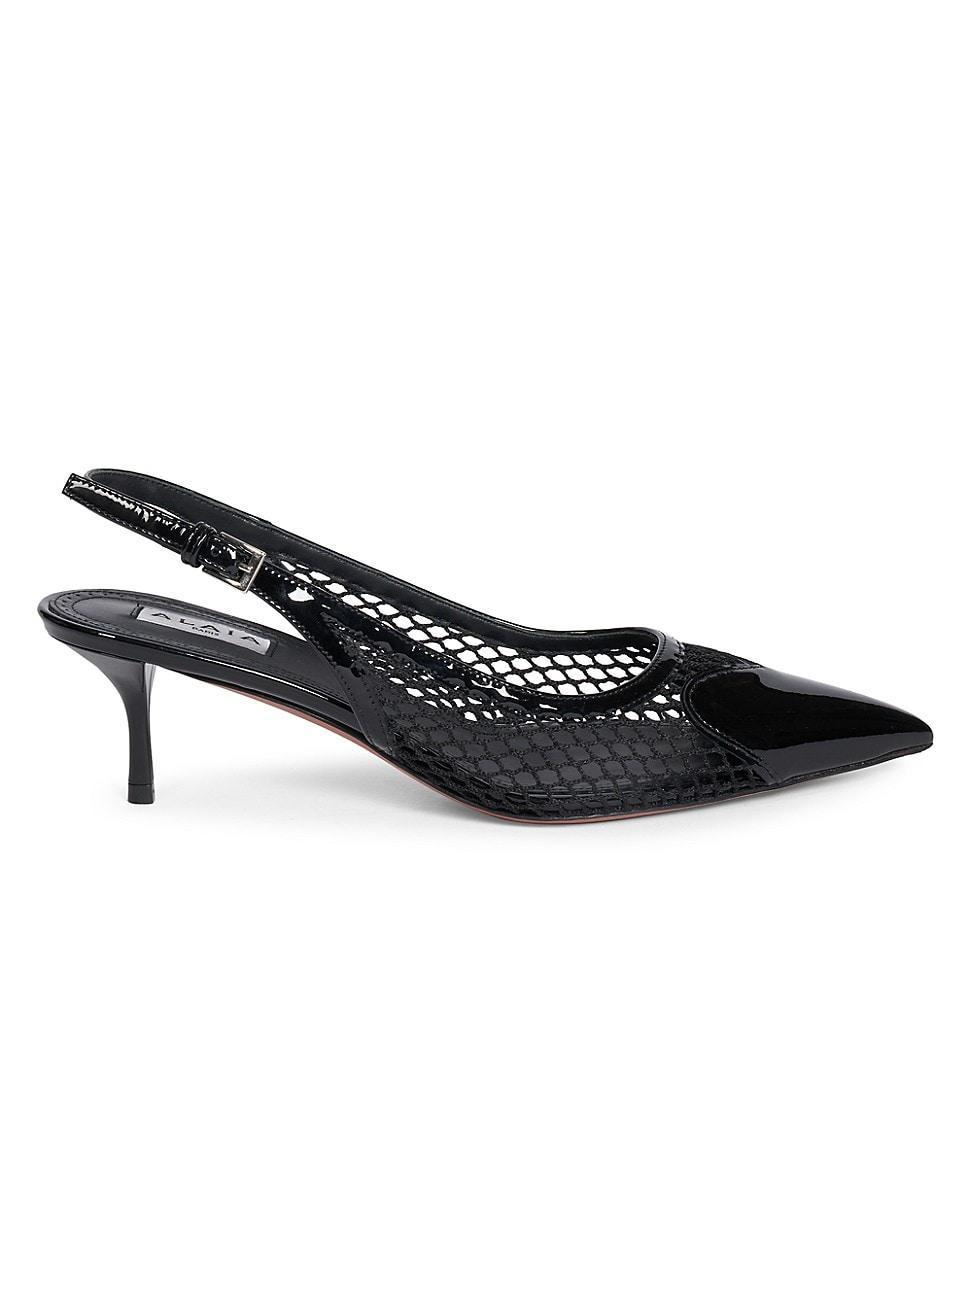 Womens 55MM Leather & Mesh Slingback Pumps Product Image